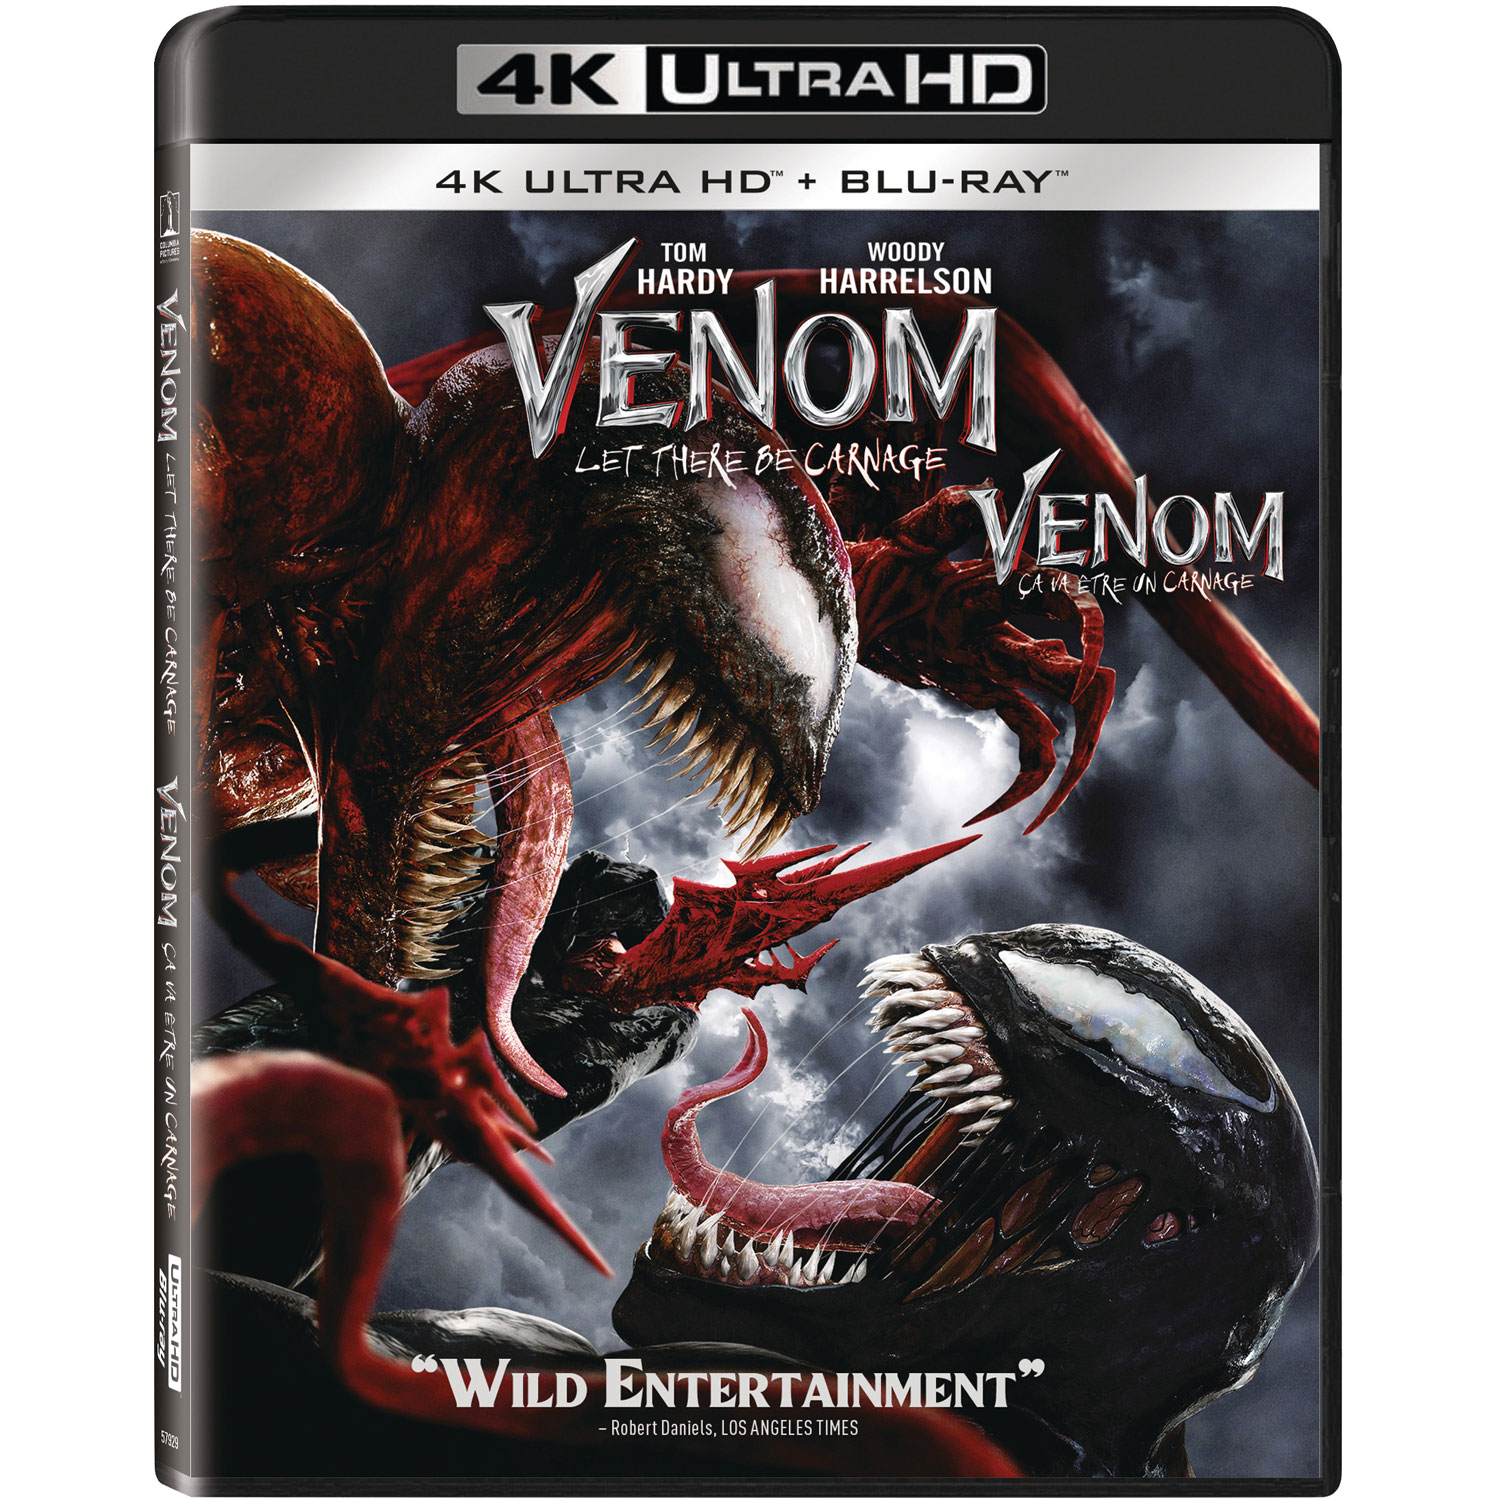 Venom: Let There Be Carnage (4K Ultra HD) (Blu-ray Combo)